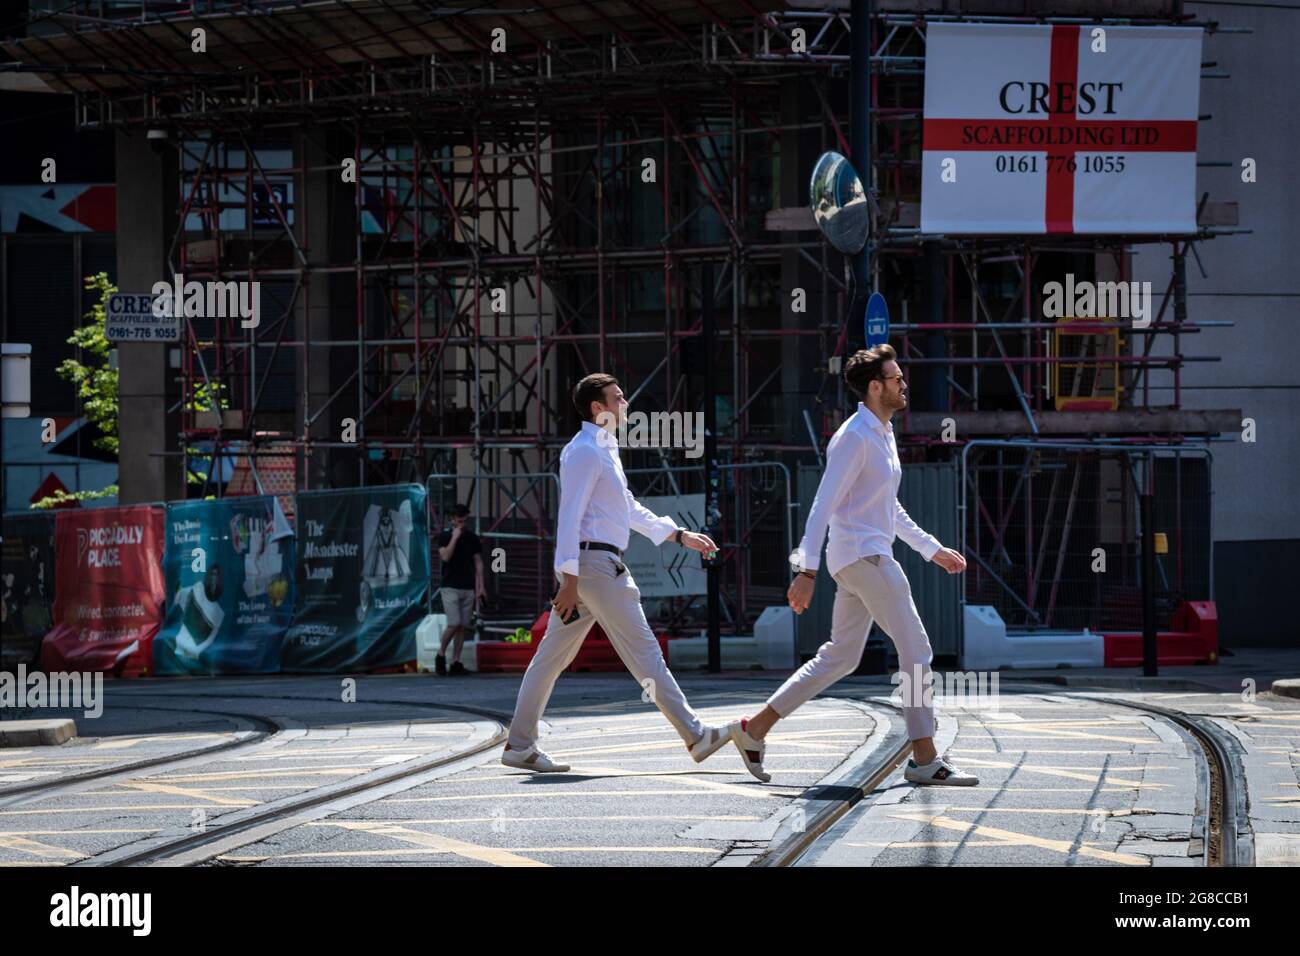 Manchester, UK. 19th July, 2021. Morning commuters make their way through Piccadilly to work on the first day of freedom since the COVID19 lockdown restrictions were implemented 16 months ago. Credit: Andy Barton/Alamy Live News Stock Photo